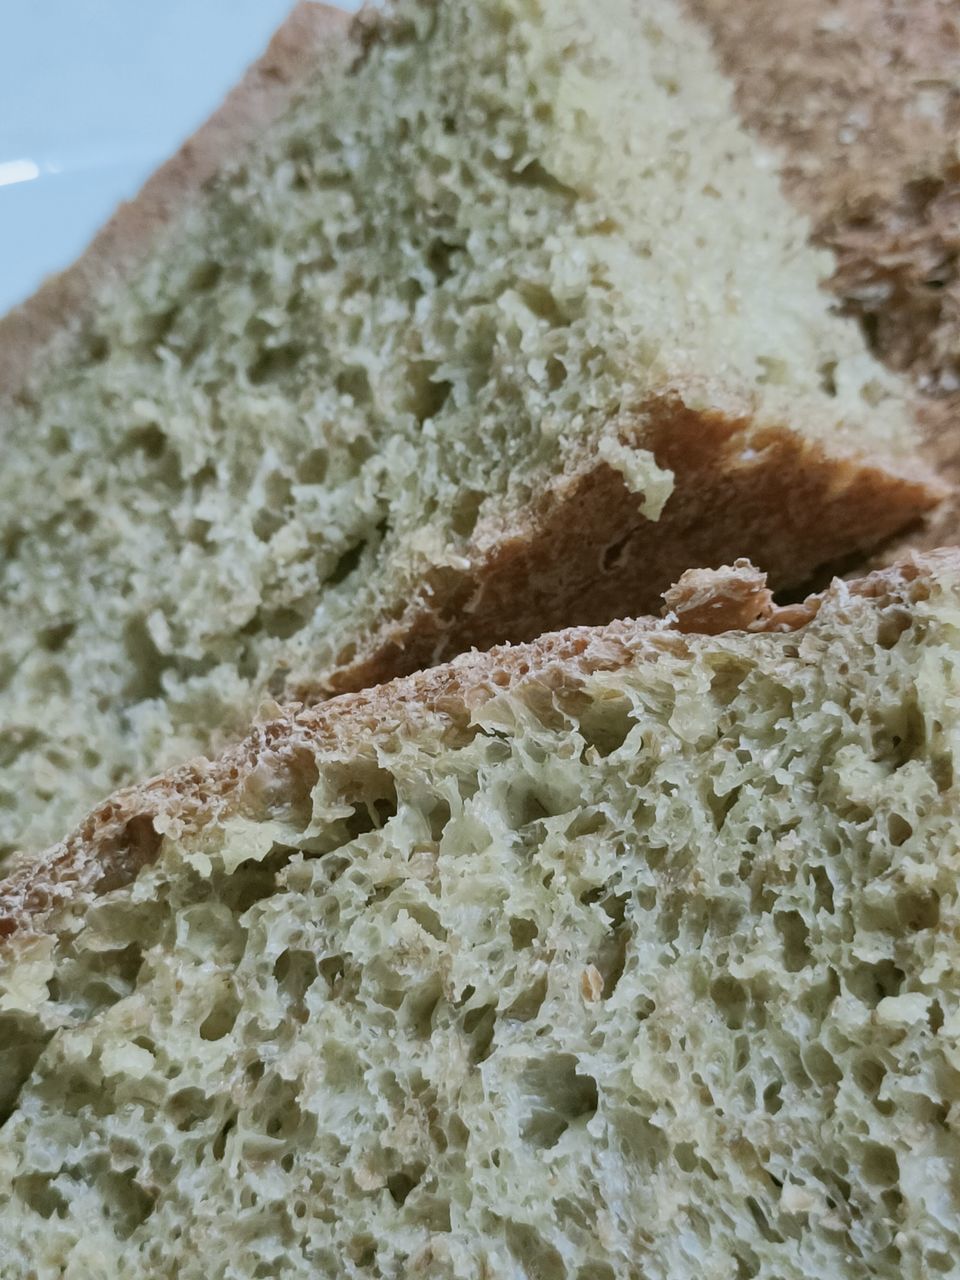 CLOSE-UP OF BREAD IN PLATE